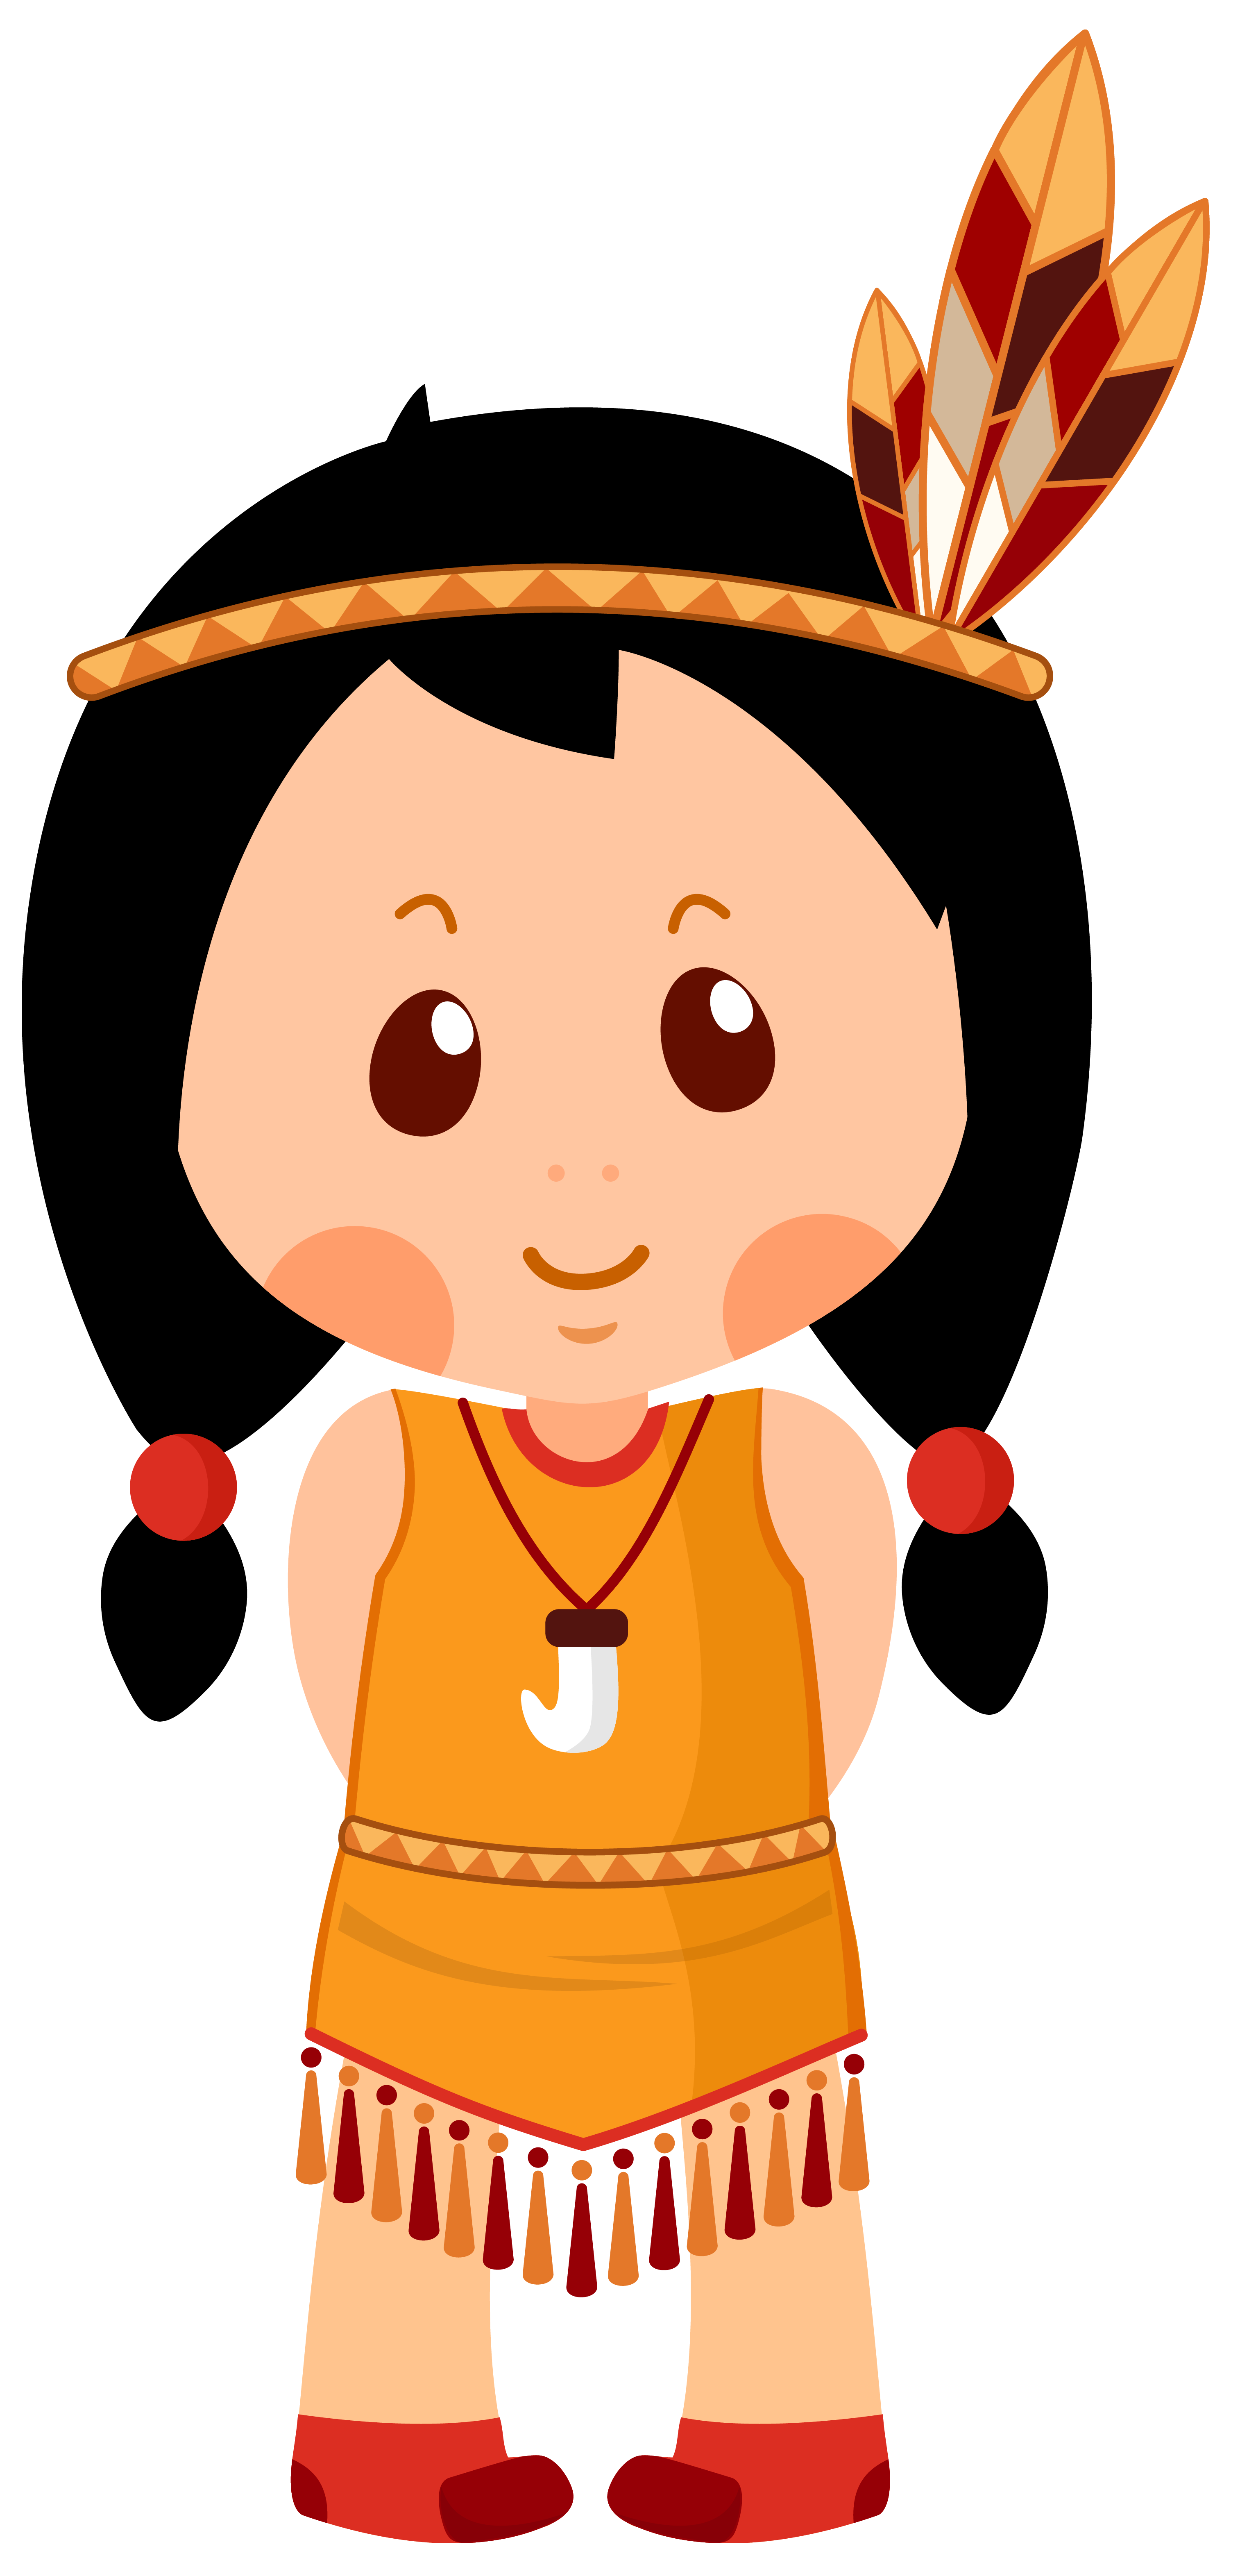 Native american girl png. Responsibility clipart orange person